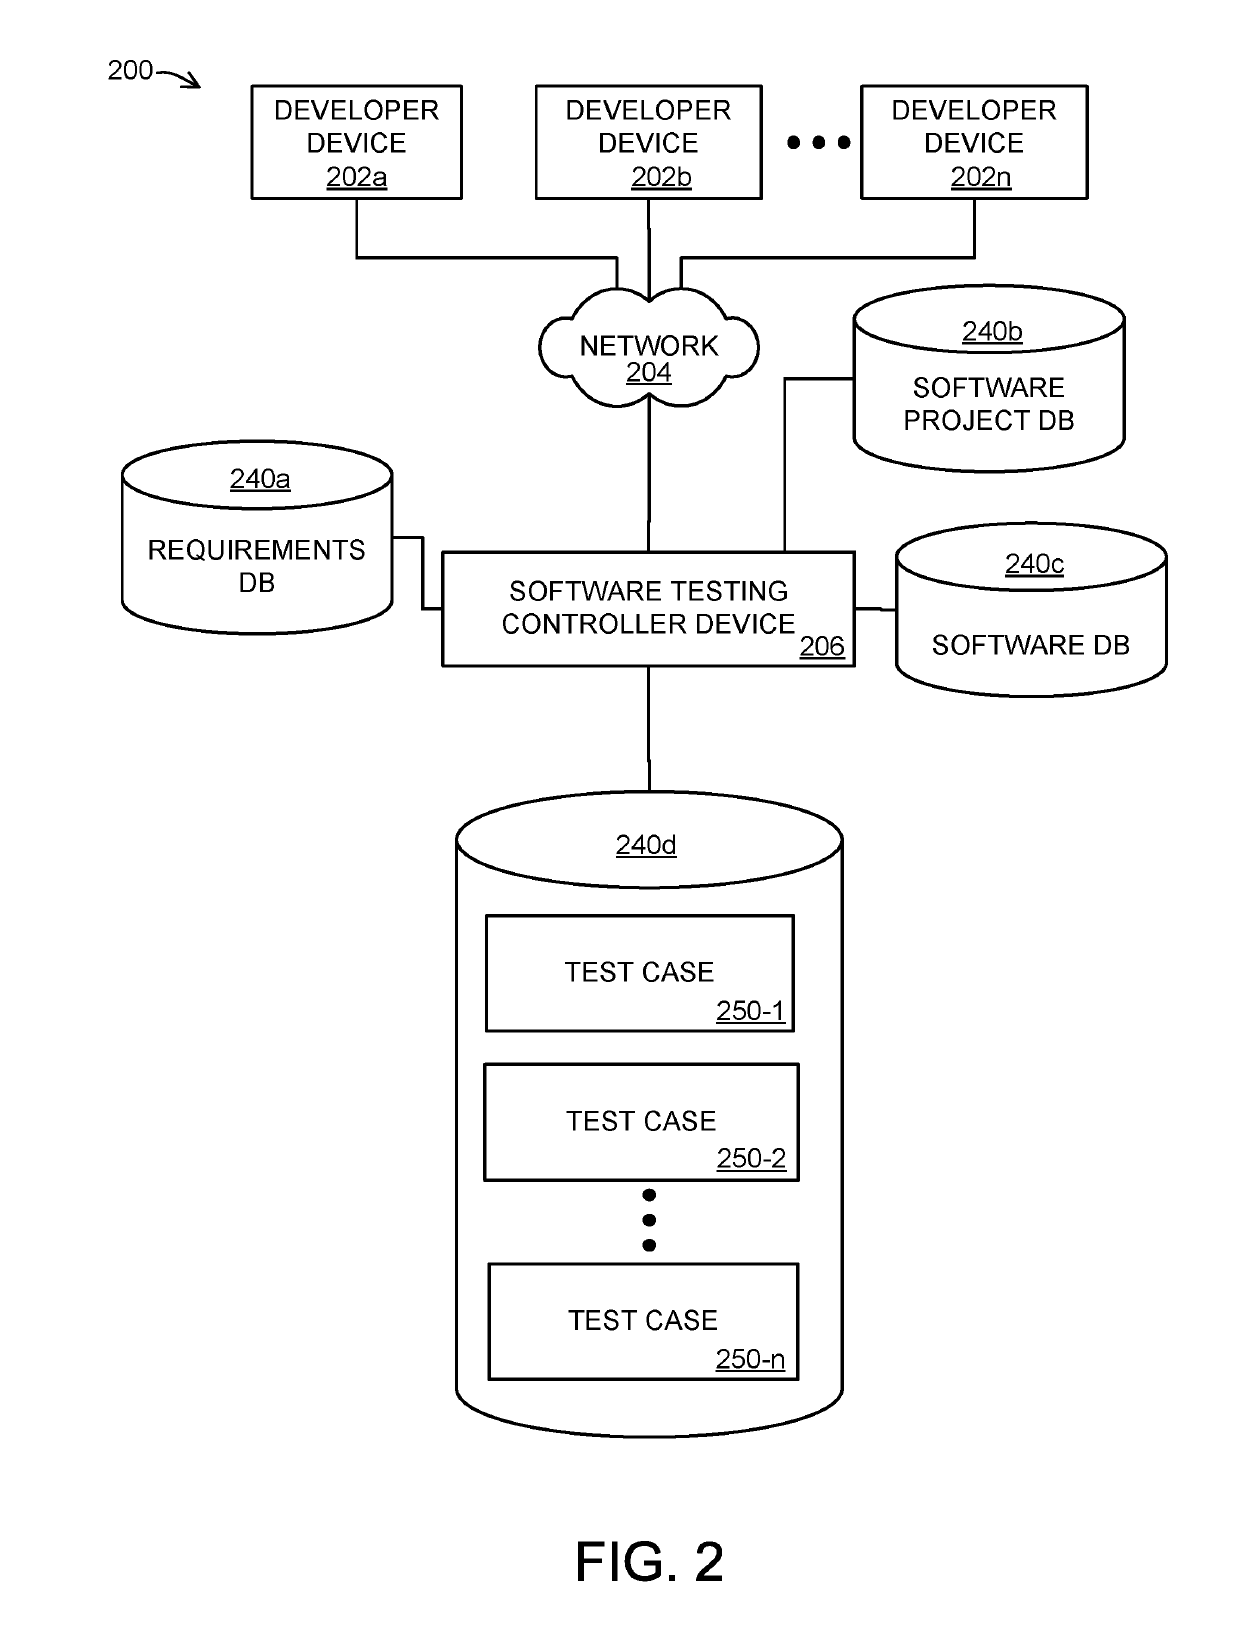 Systems, methods, and apparatus for dynamic software generation and testing